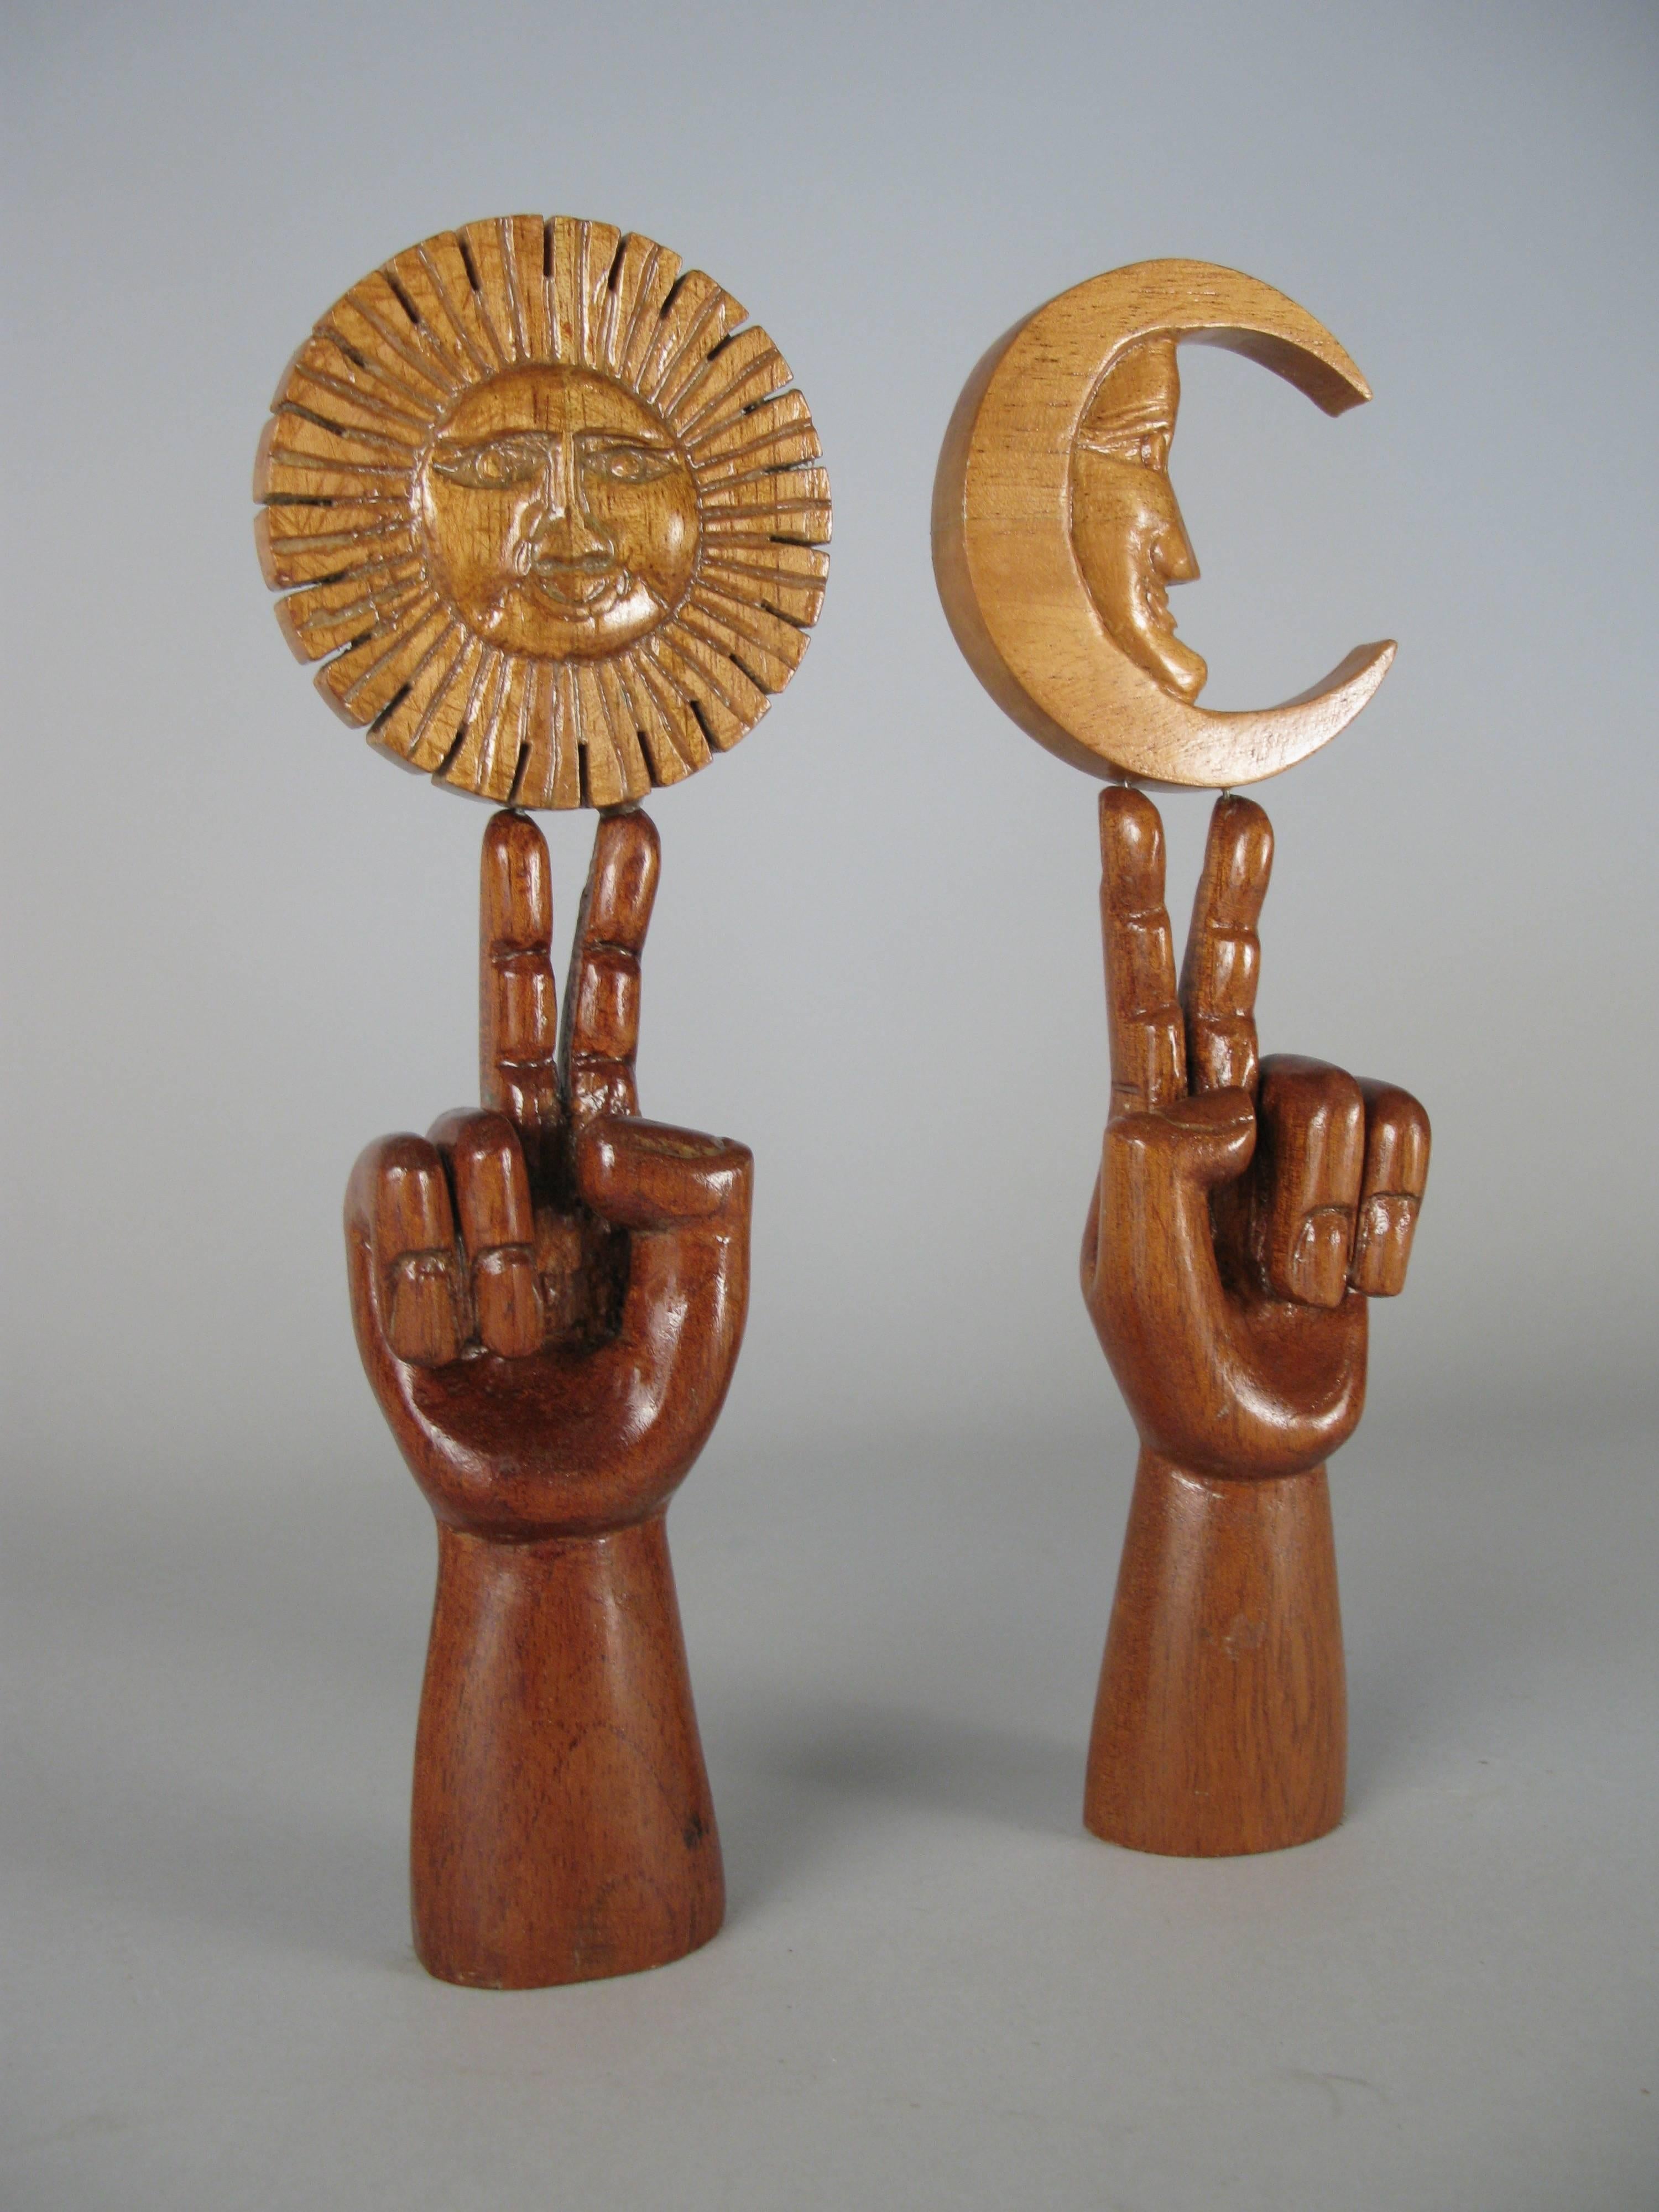 A pair of celebrated and surrealist sculptures, titled 